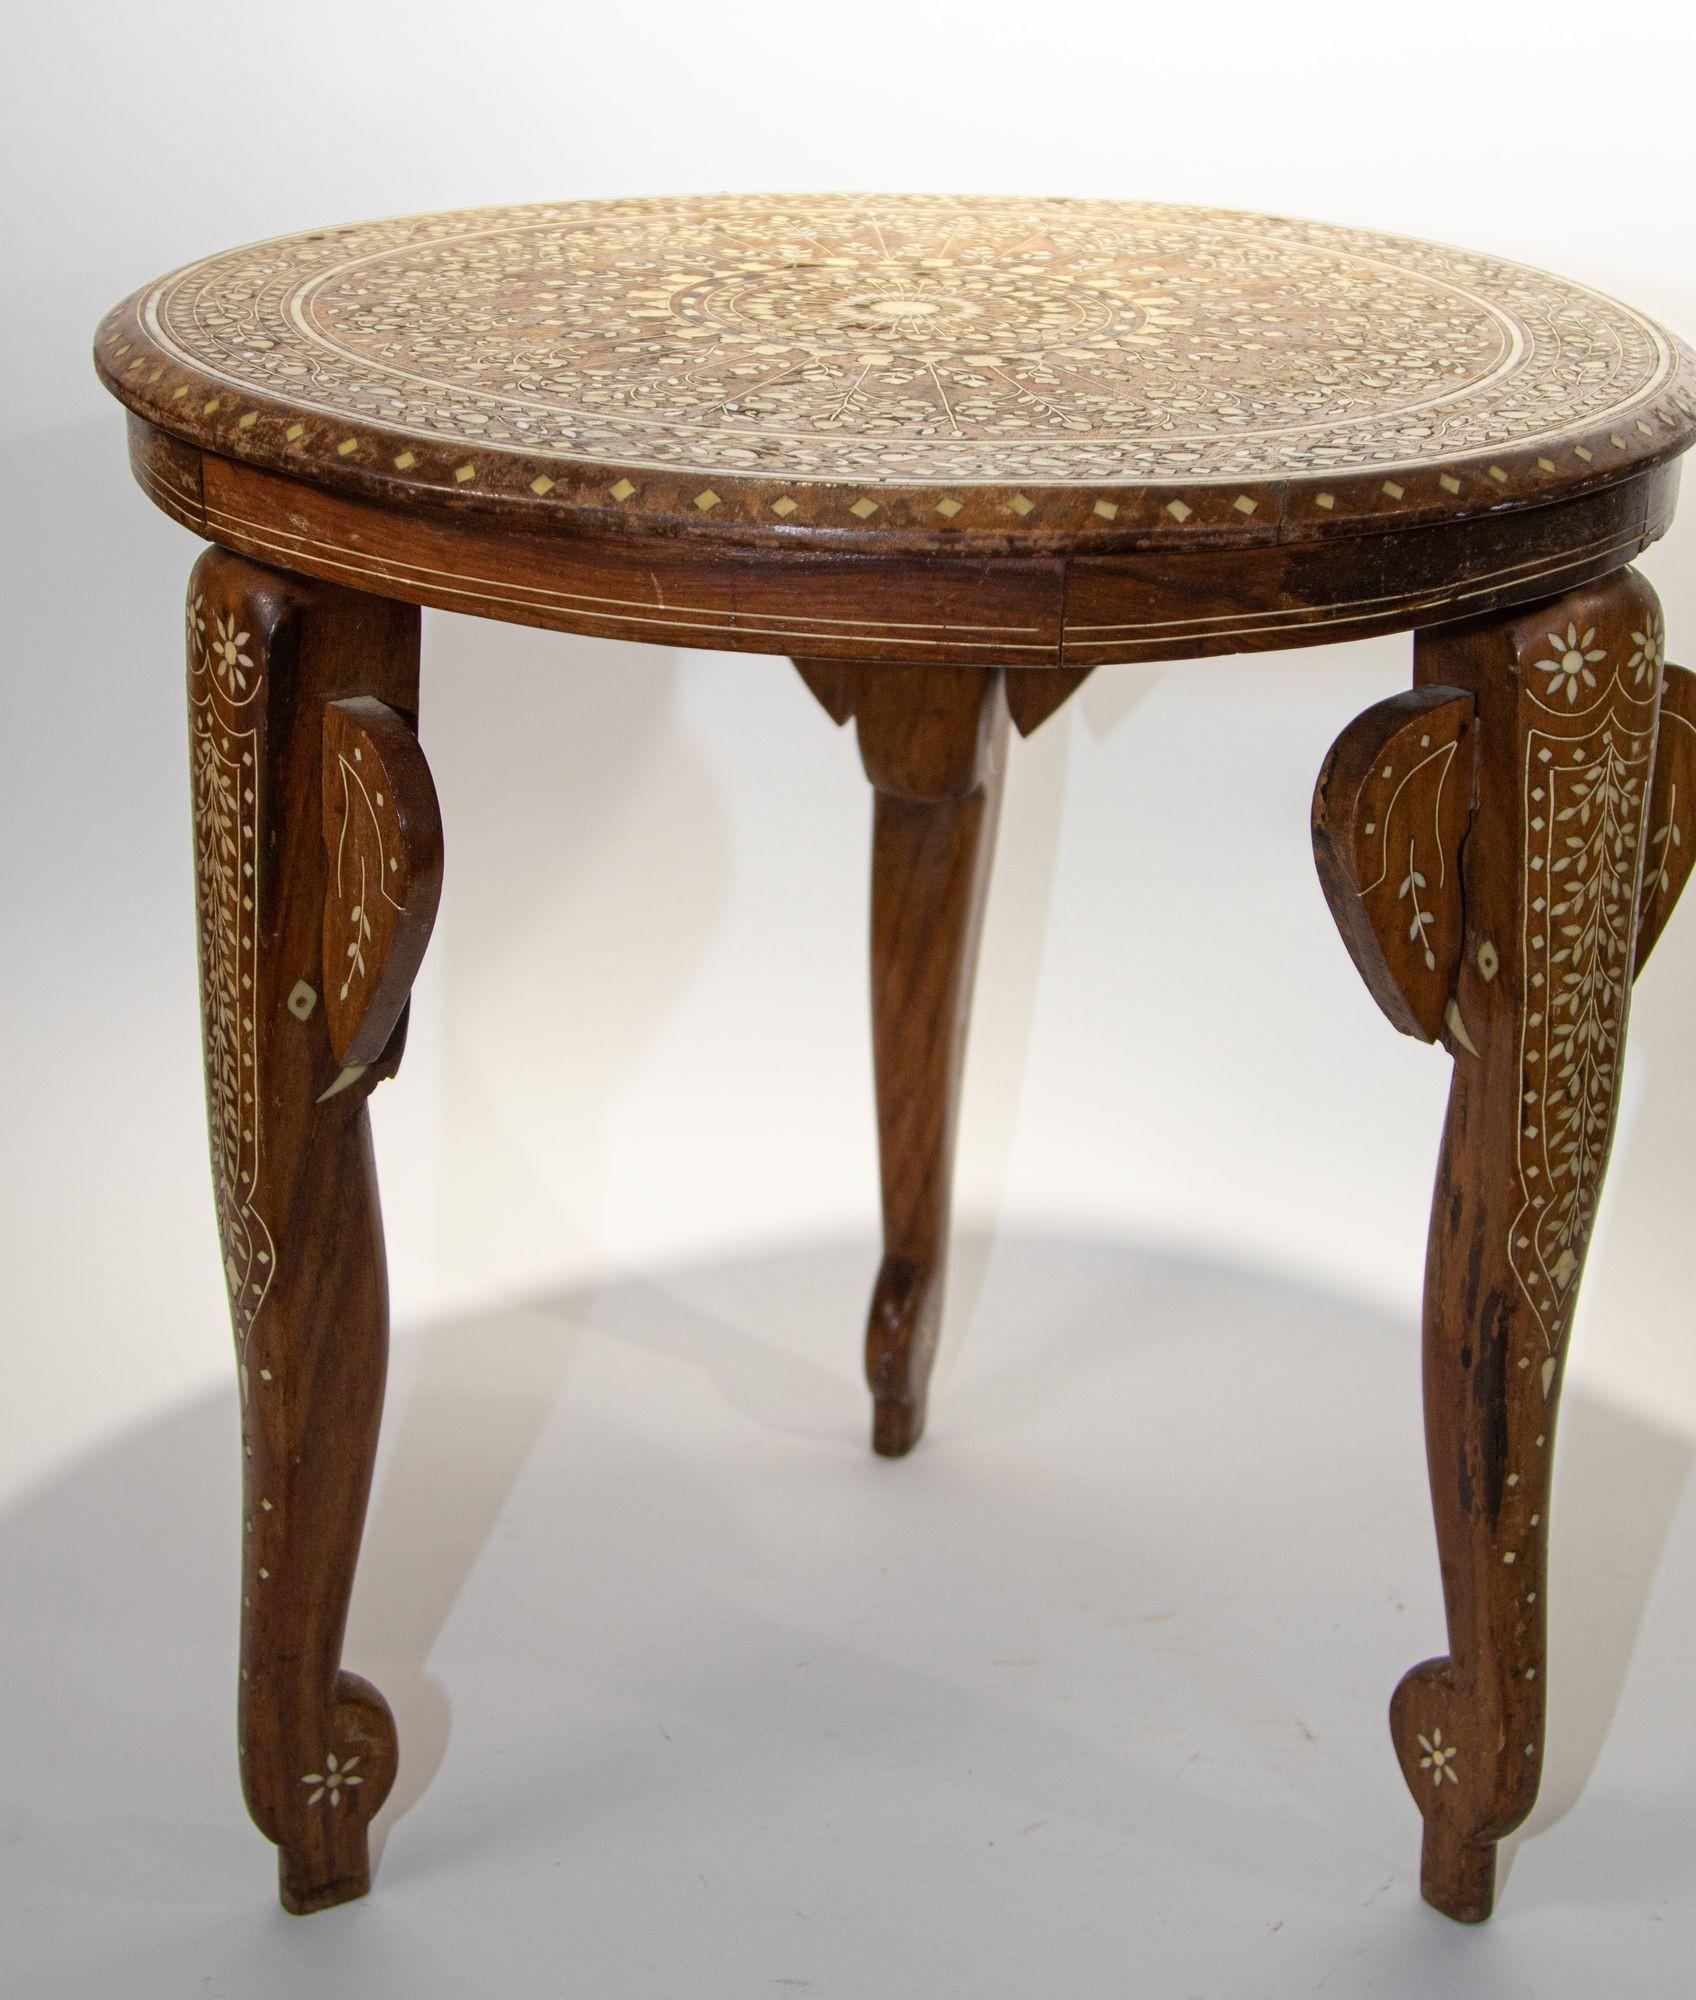 Antique 19th c. Anglo Indian Mughal teak inlaid side table.
Fine and elegant Moorish round side table hand carved with bone inlaid elaborate Moorish geometric design.
With elephant inlaid bone figurative detail on the 3 supporting legs.
Size: 18